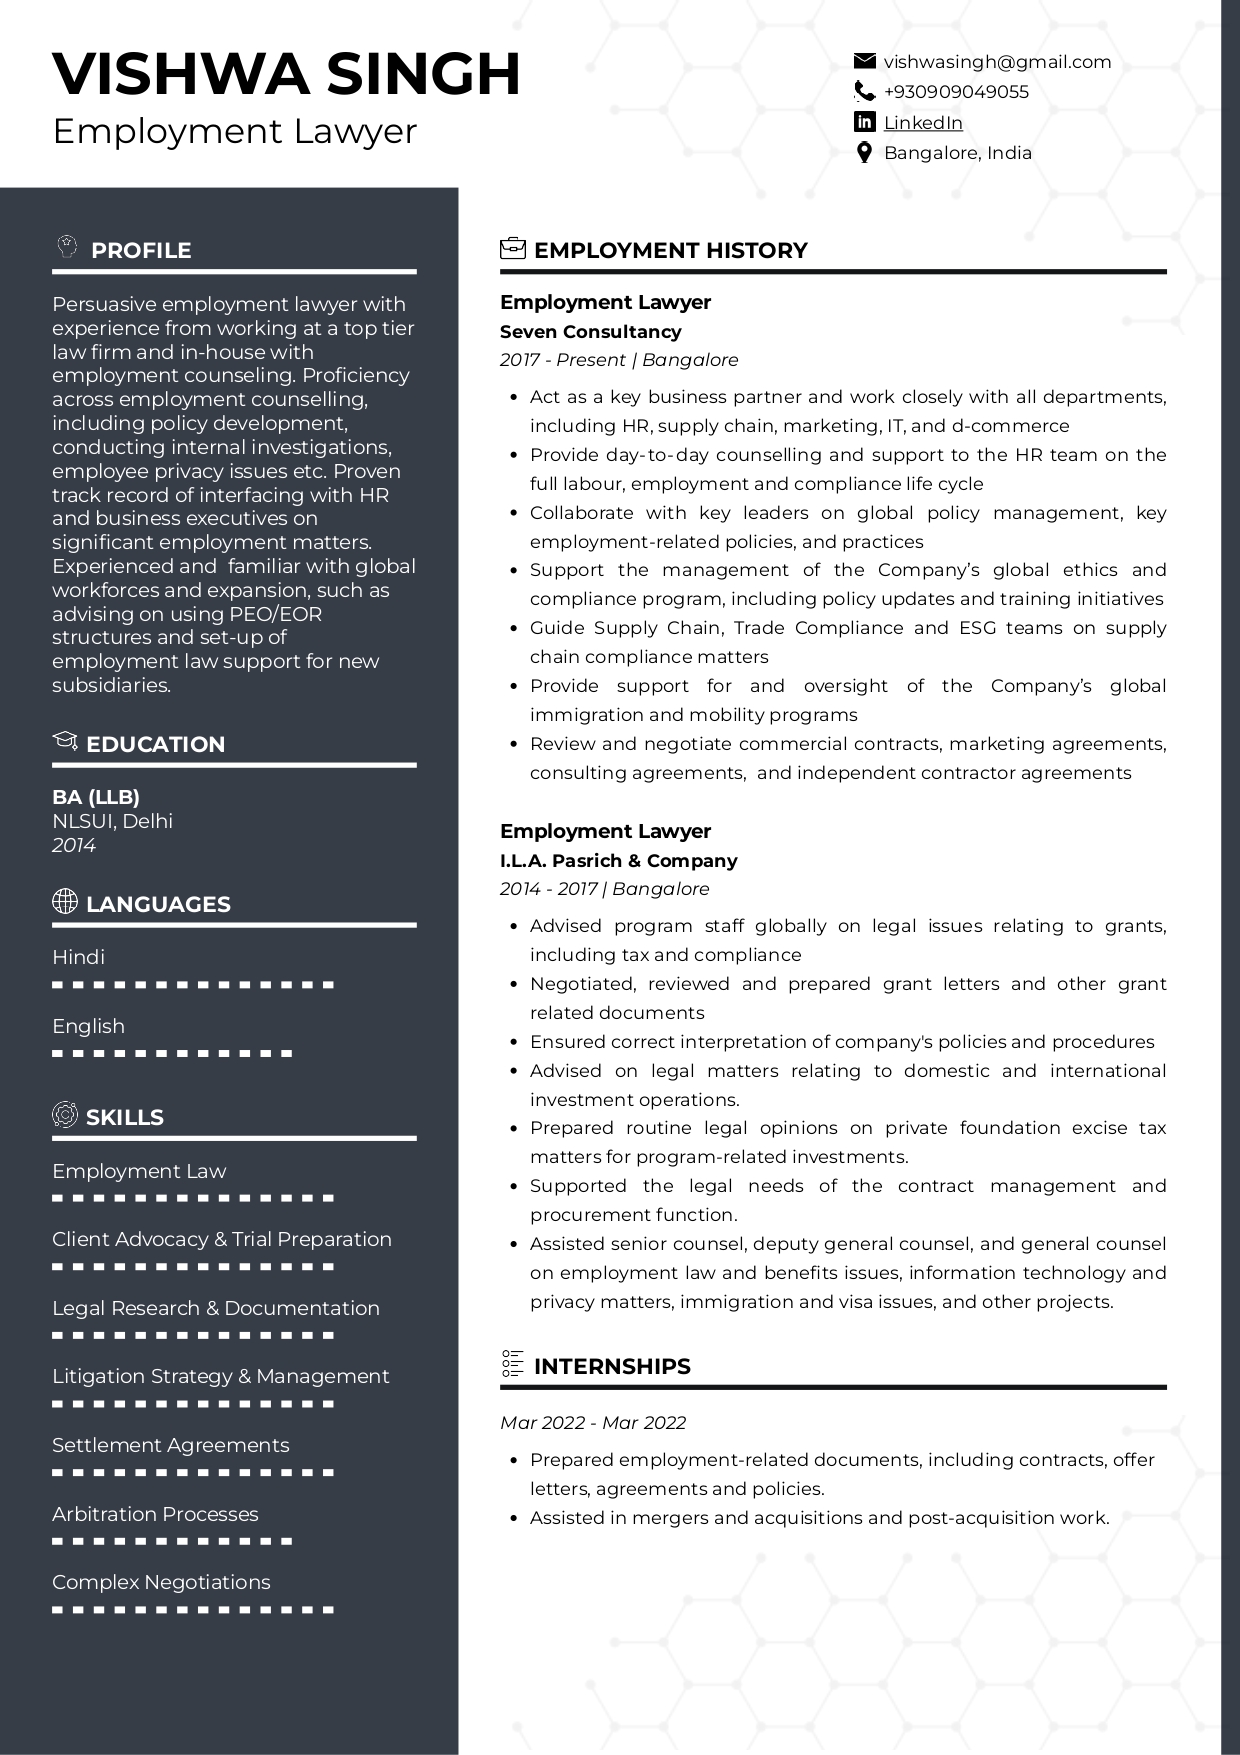 Sample Resume of Employment Lawyer | Free Resume Templates & Samples on Resumod.co